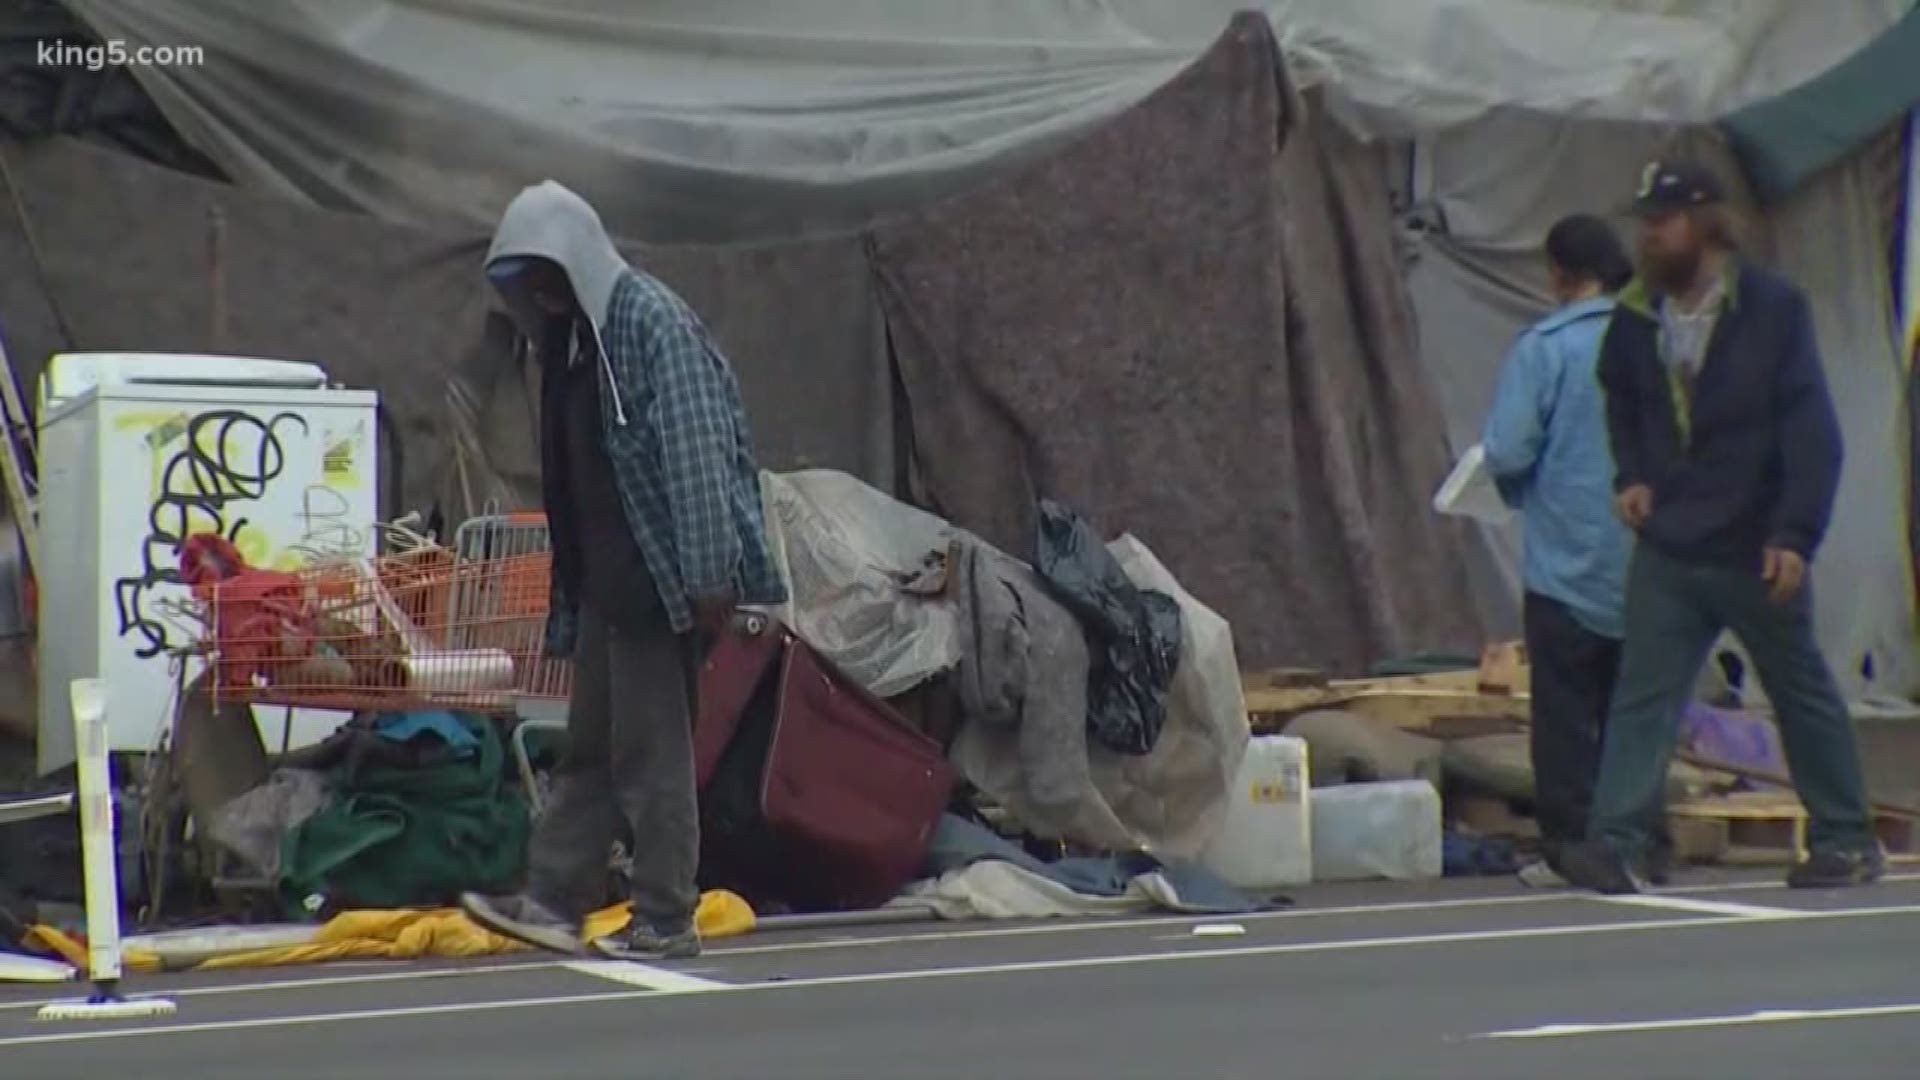 Concerned with biohazards, safety and criminal activity, police are clearing out a homeless encampment at 10th Ave S between Dearborn St. and Weller St. in Seattle.